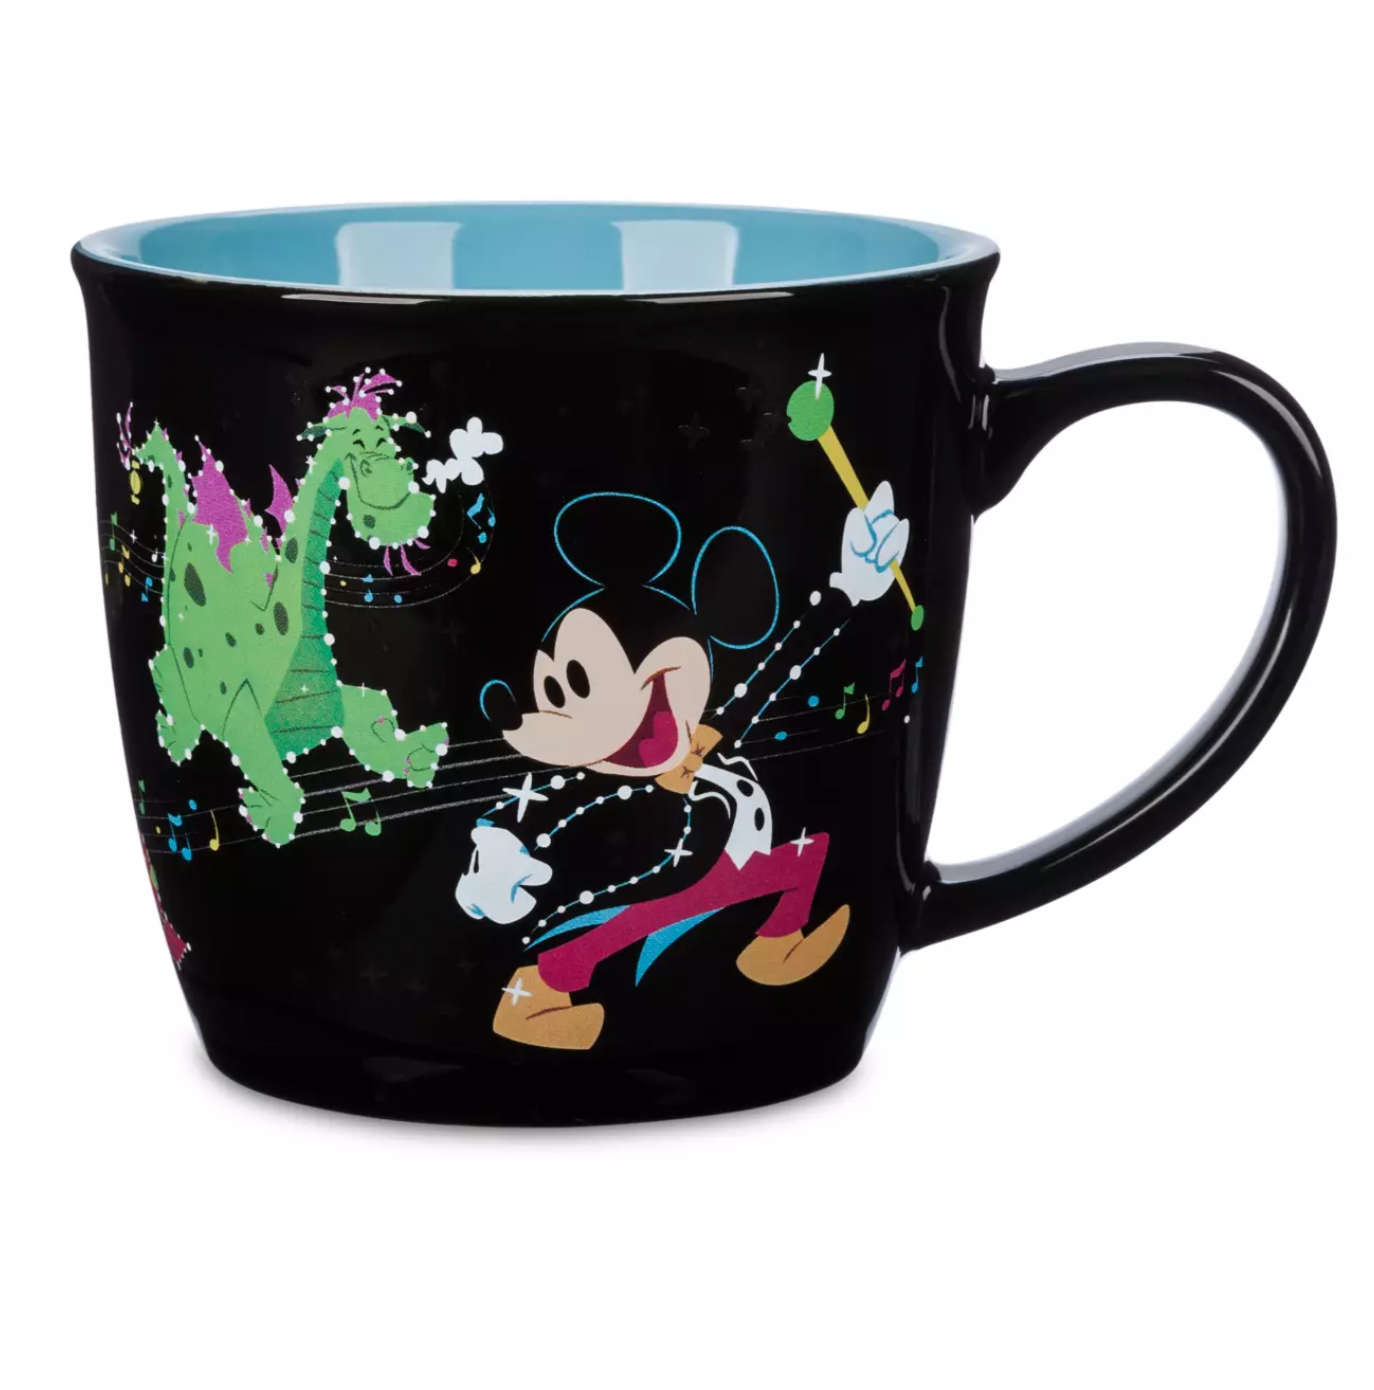 Disney The Main Street Electrical Parade 50th Anniversary Color Changing Mug New